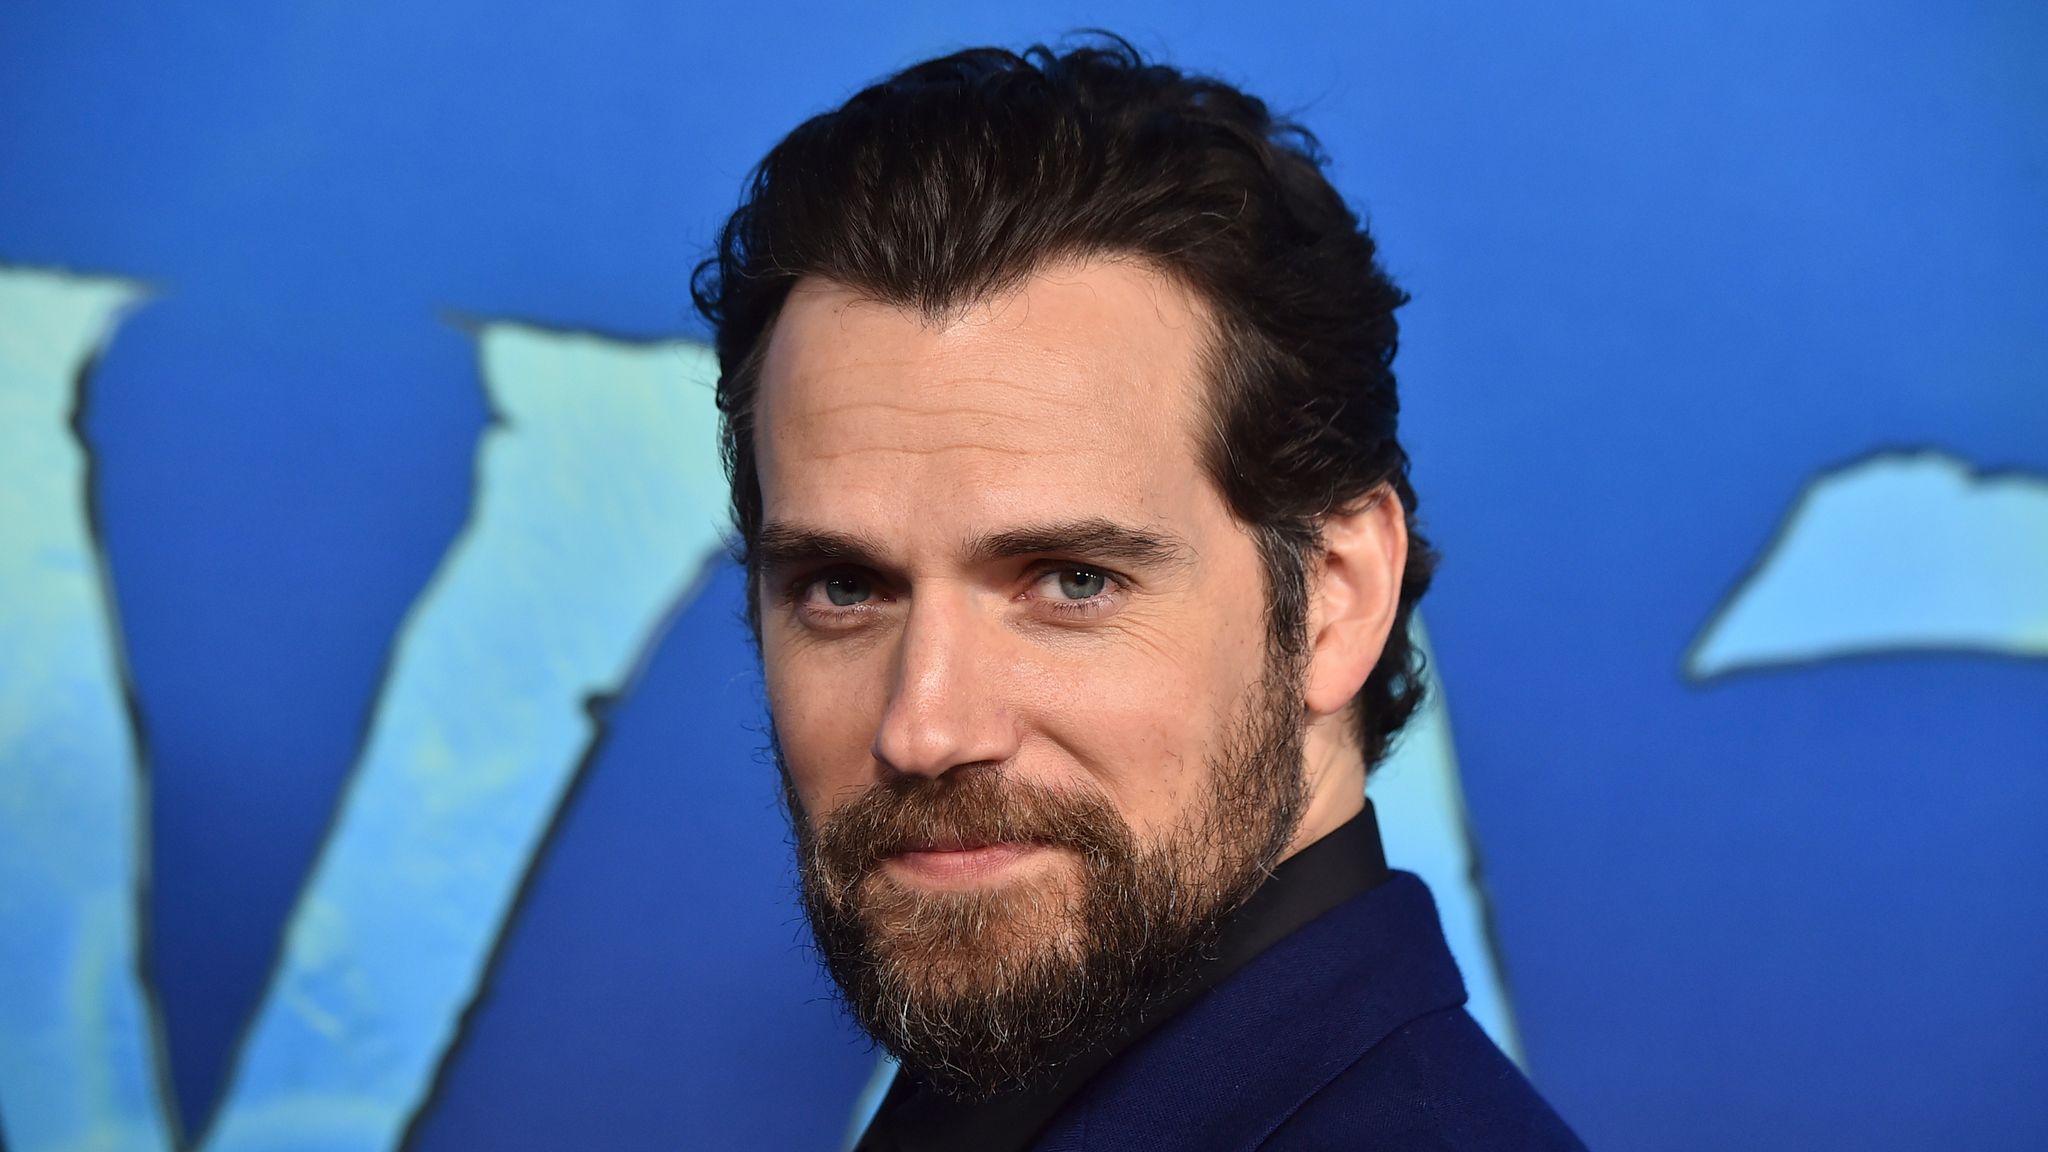 Henry Cavill Met with DC about Playing New Character After Superman